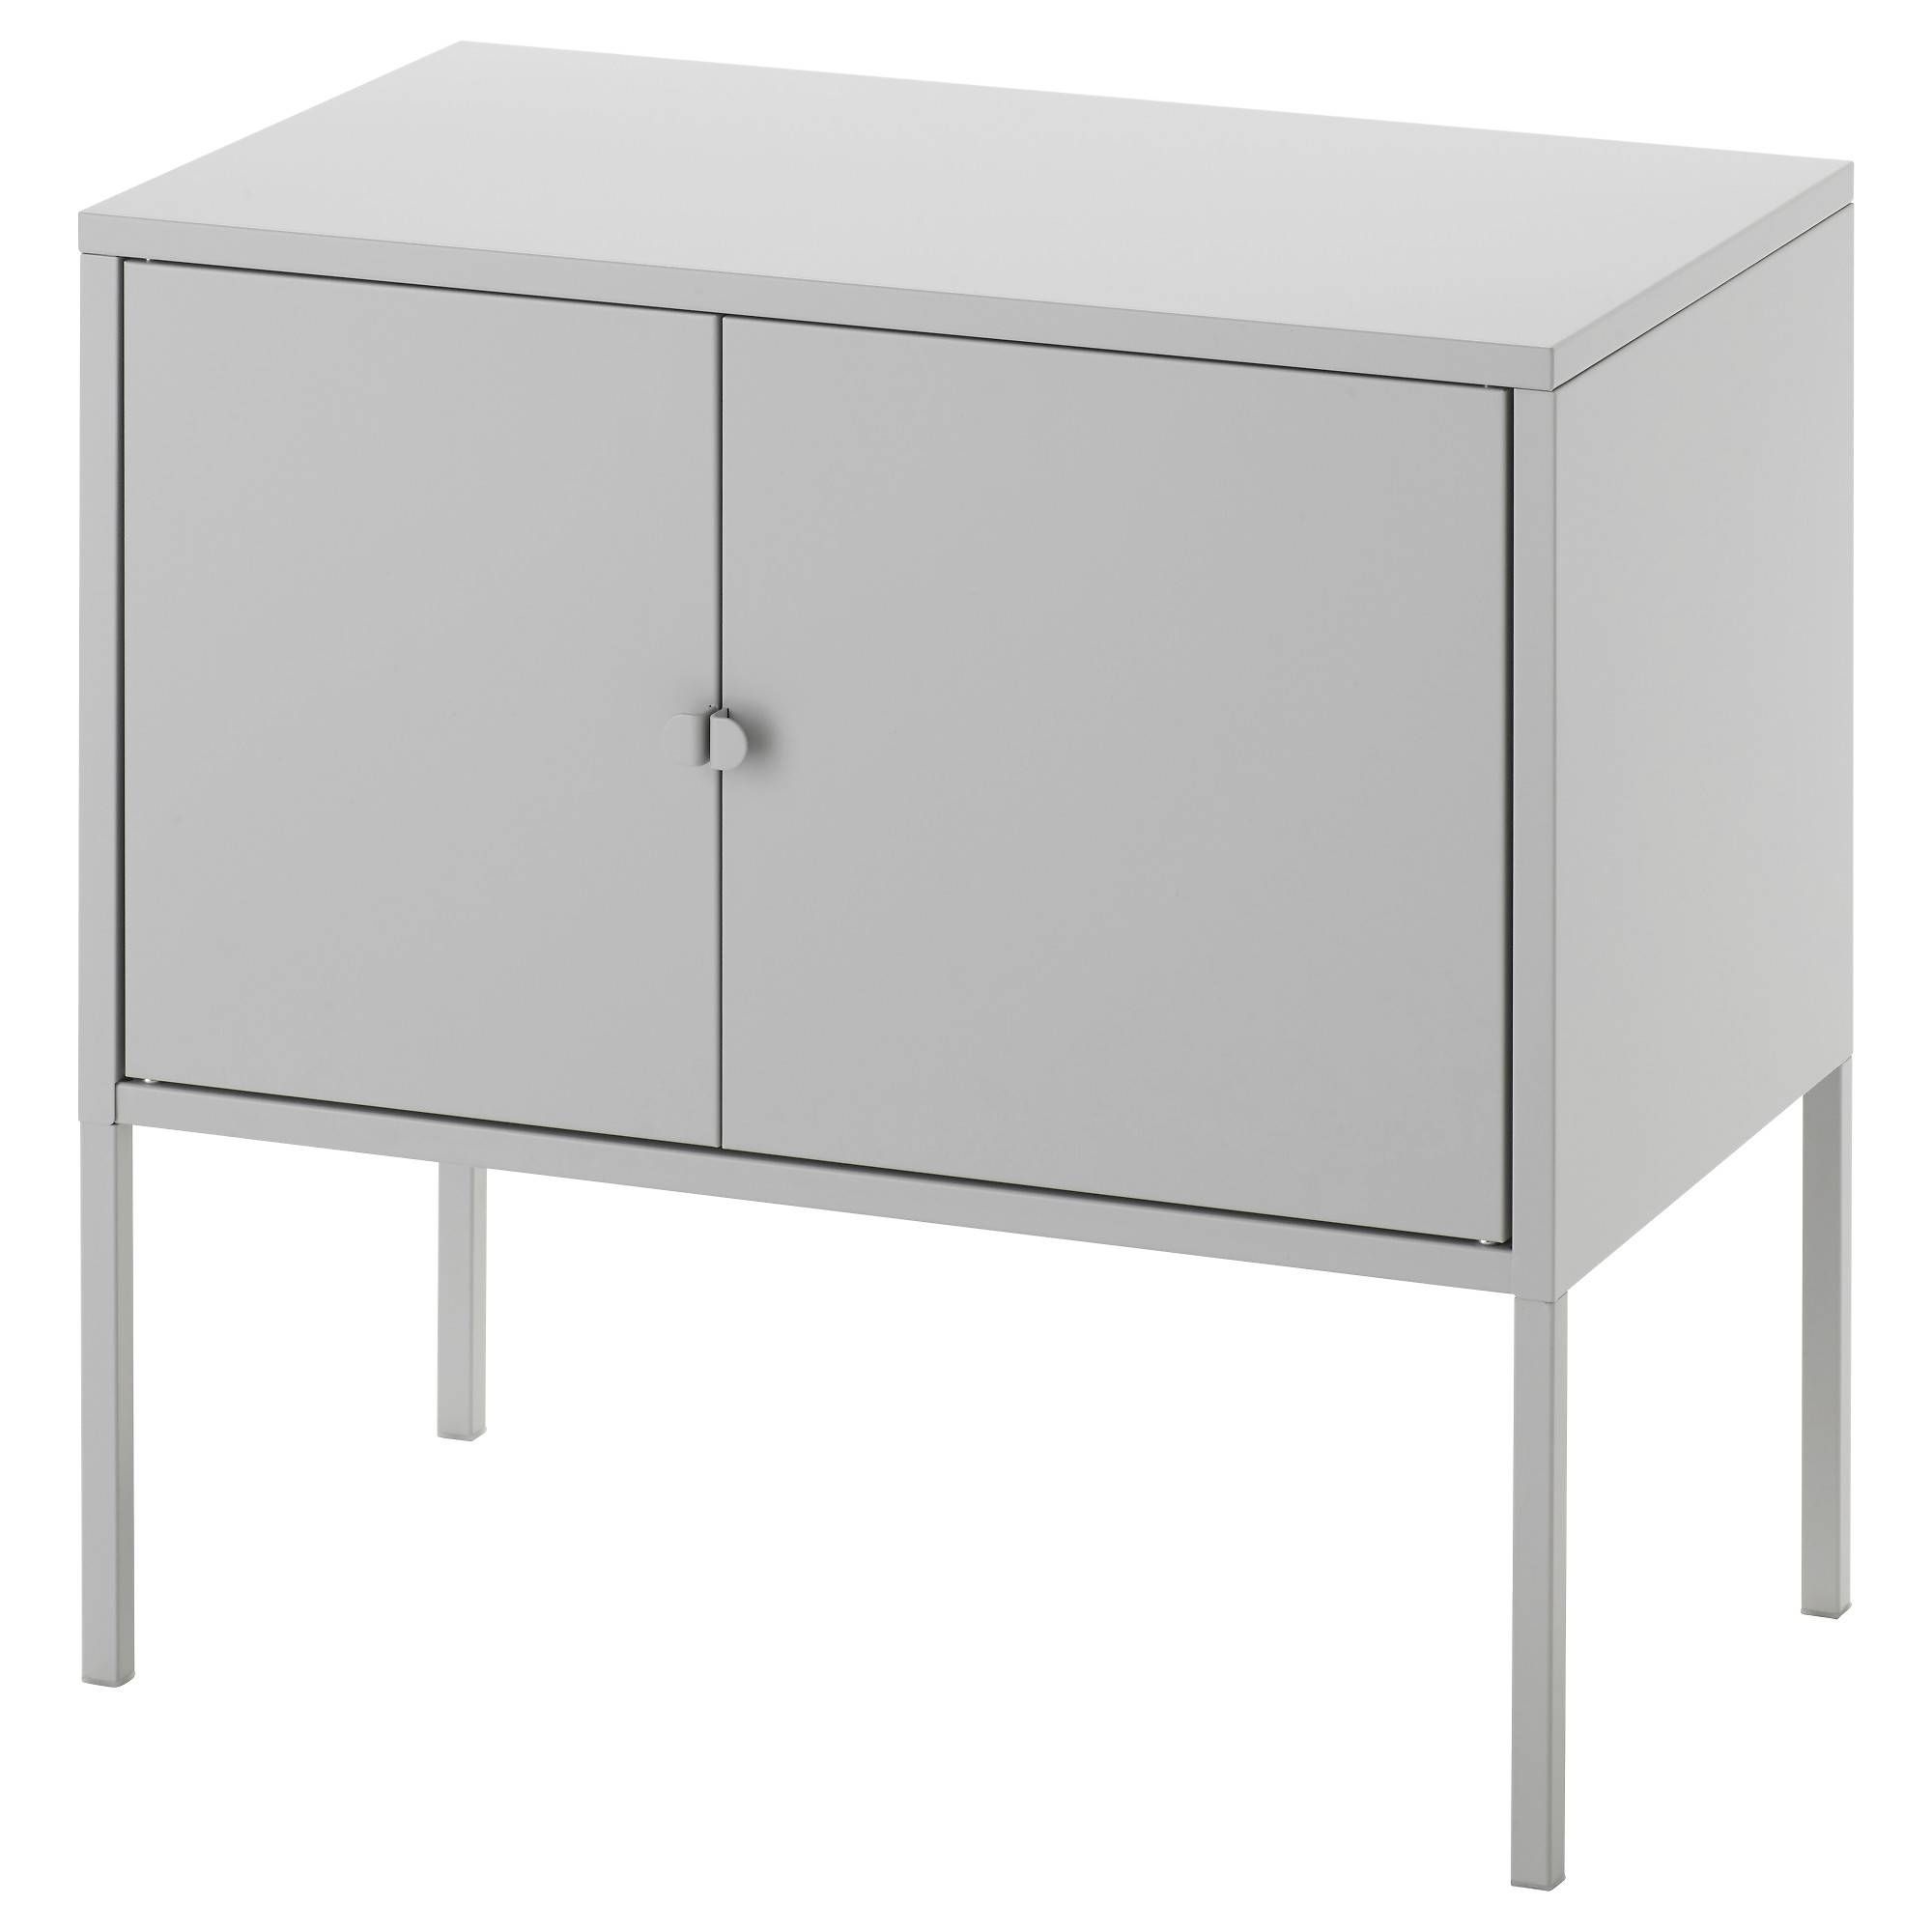 Cabinets & Sideboards – Ikea For Current Long Thin Sideboards (View 15 of 15)